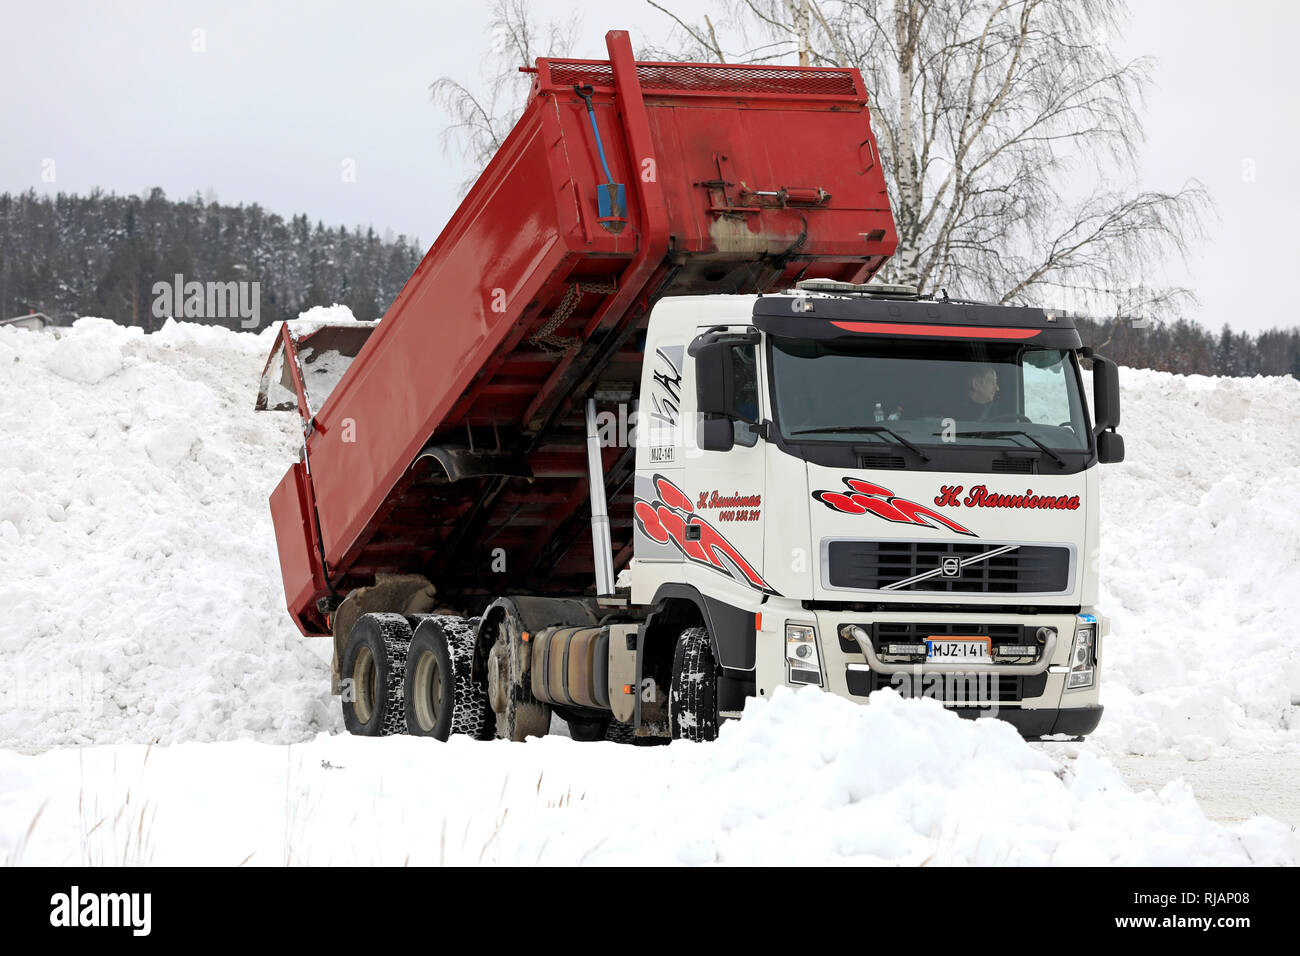 Salo, Finland - February 2, 2019: Volvo tipper truck unloads snow cleared from streets and parking lots at municipal snow dumping area. Stock Photo